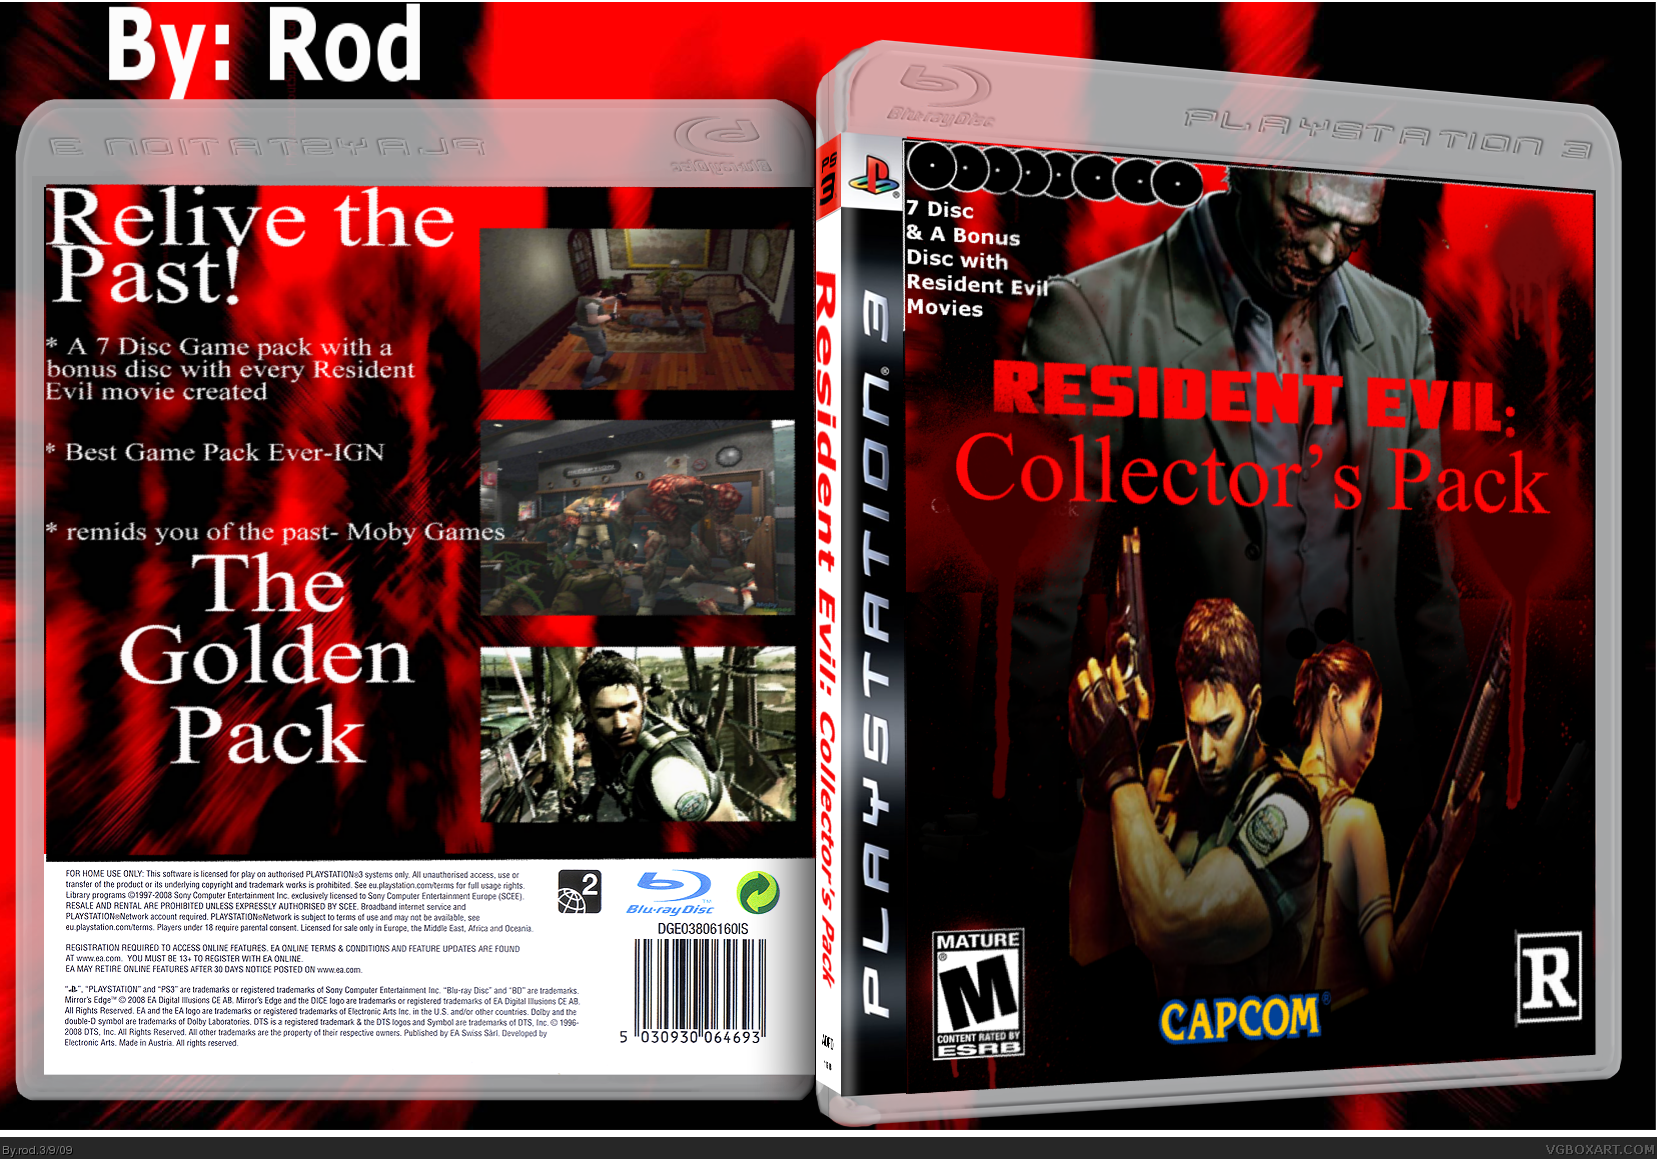 Resident Evil: Collector's Pack(Games & Movies) box cover